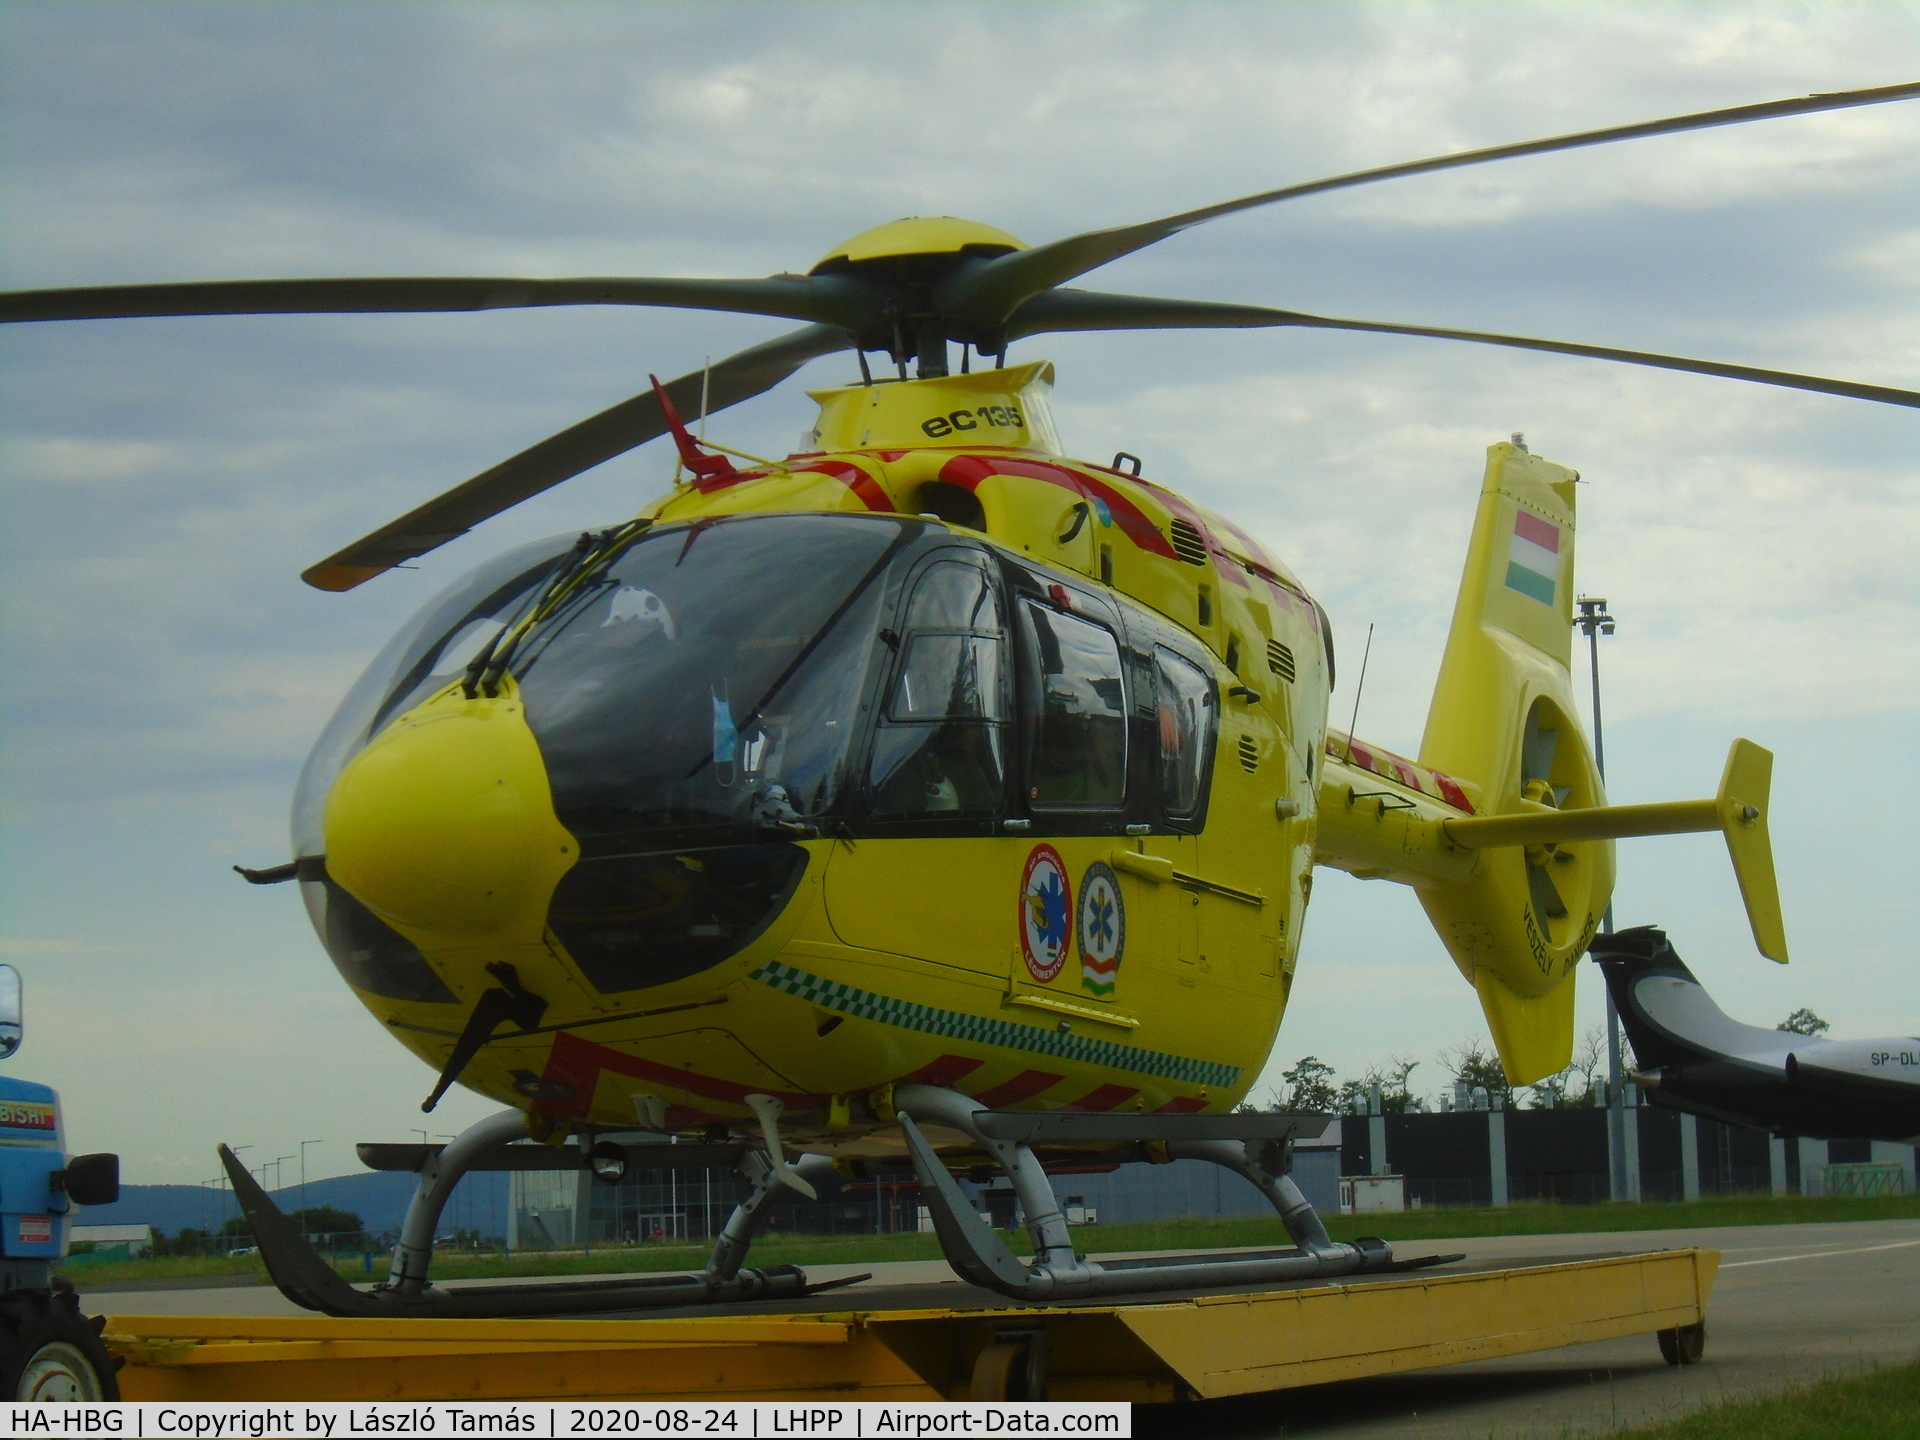 HA-HBG, 2004 Eurocopter EC-135P-2 C/N 0350, Air Ambulance helicopter ready for action...